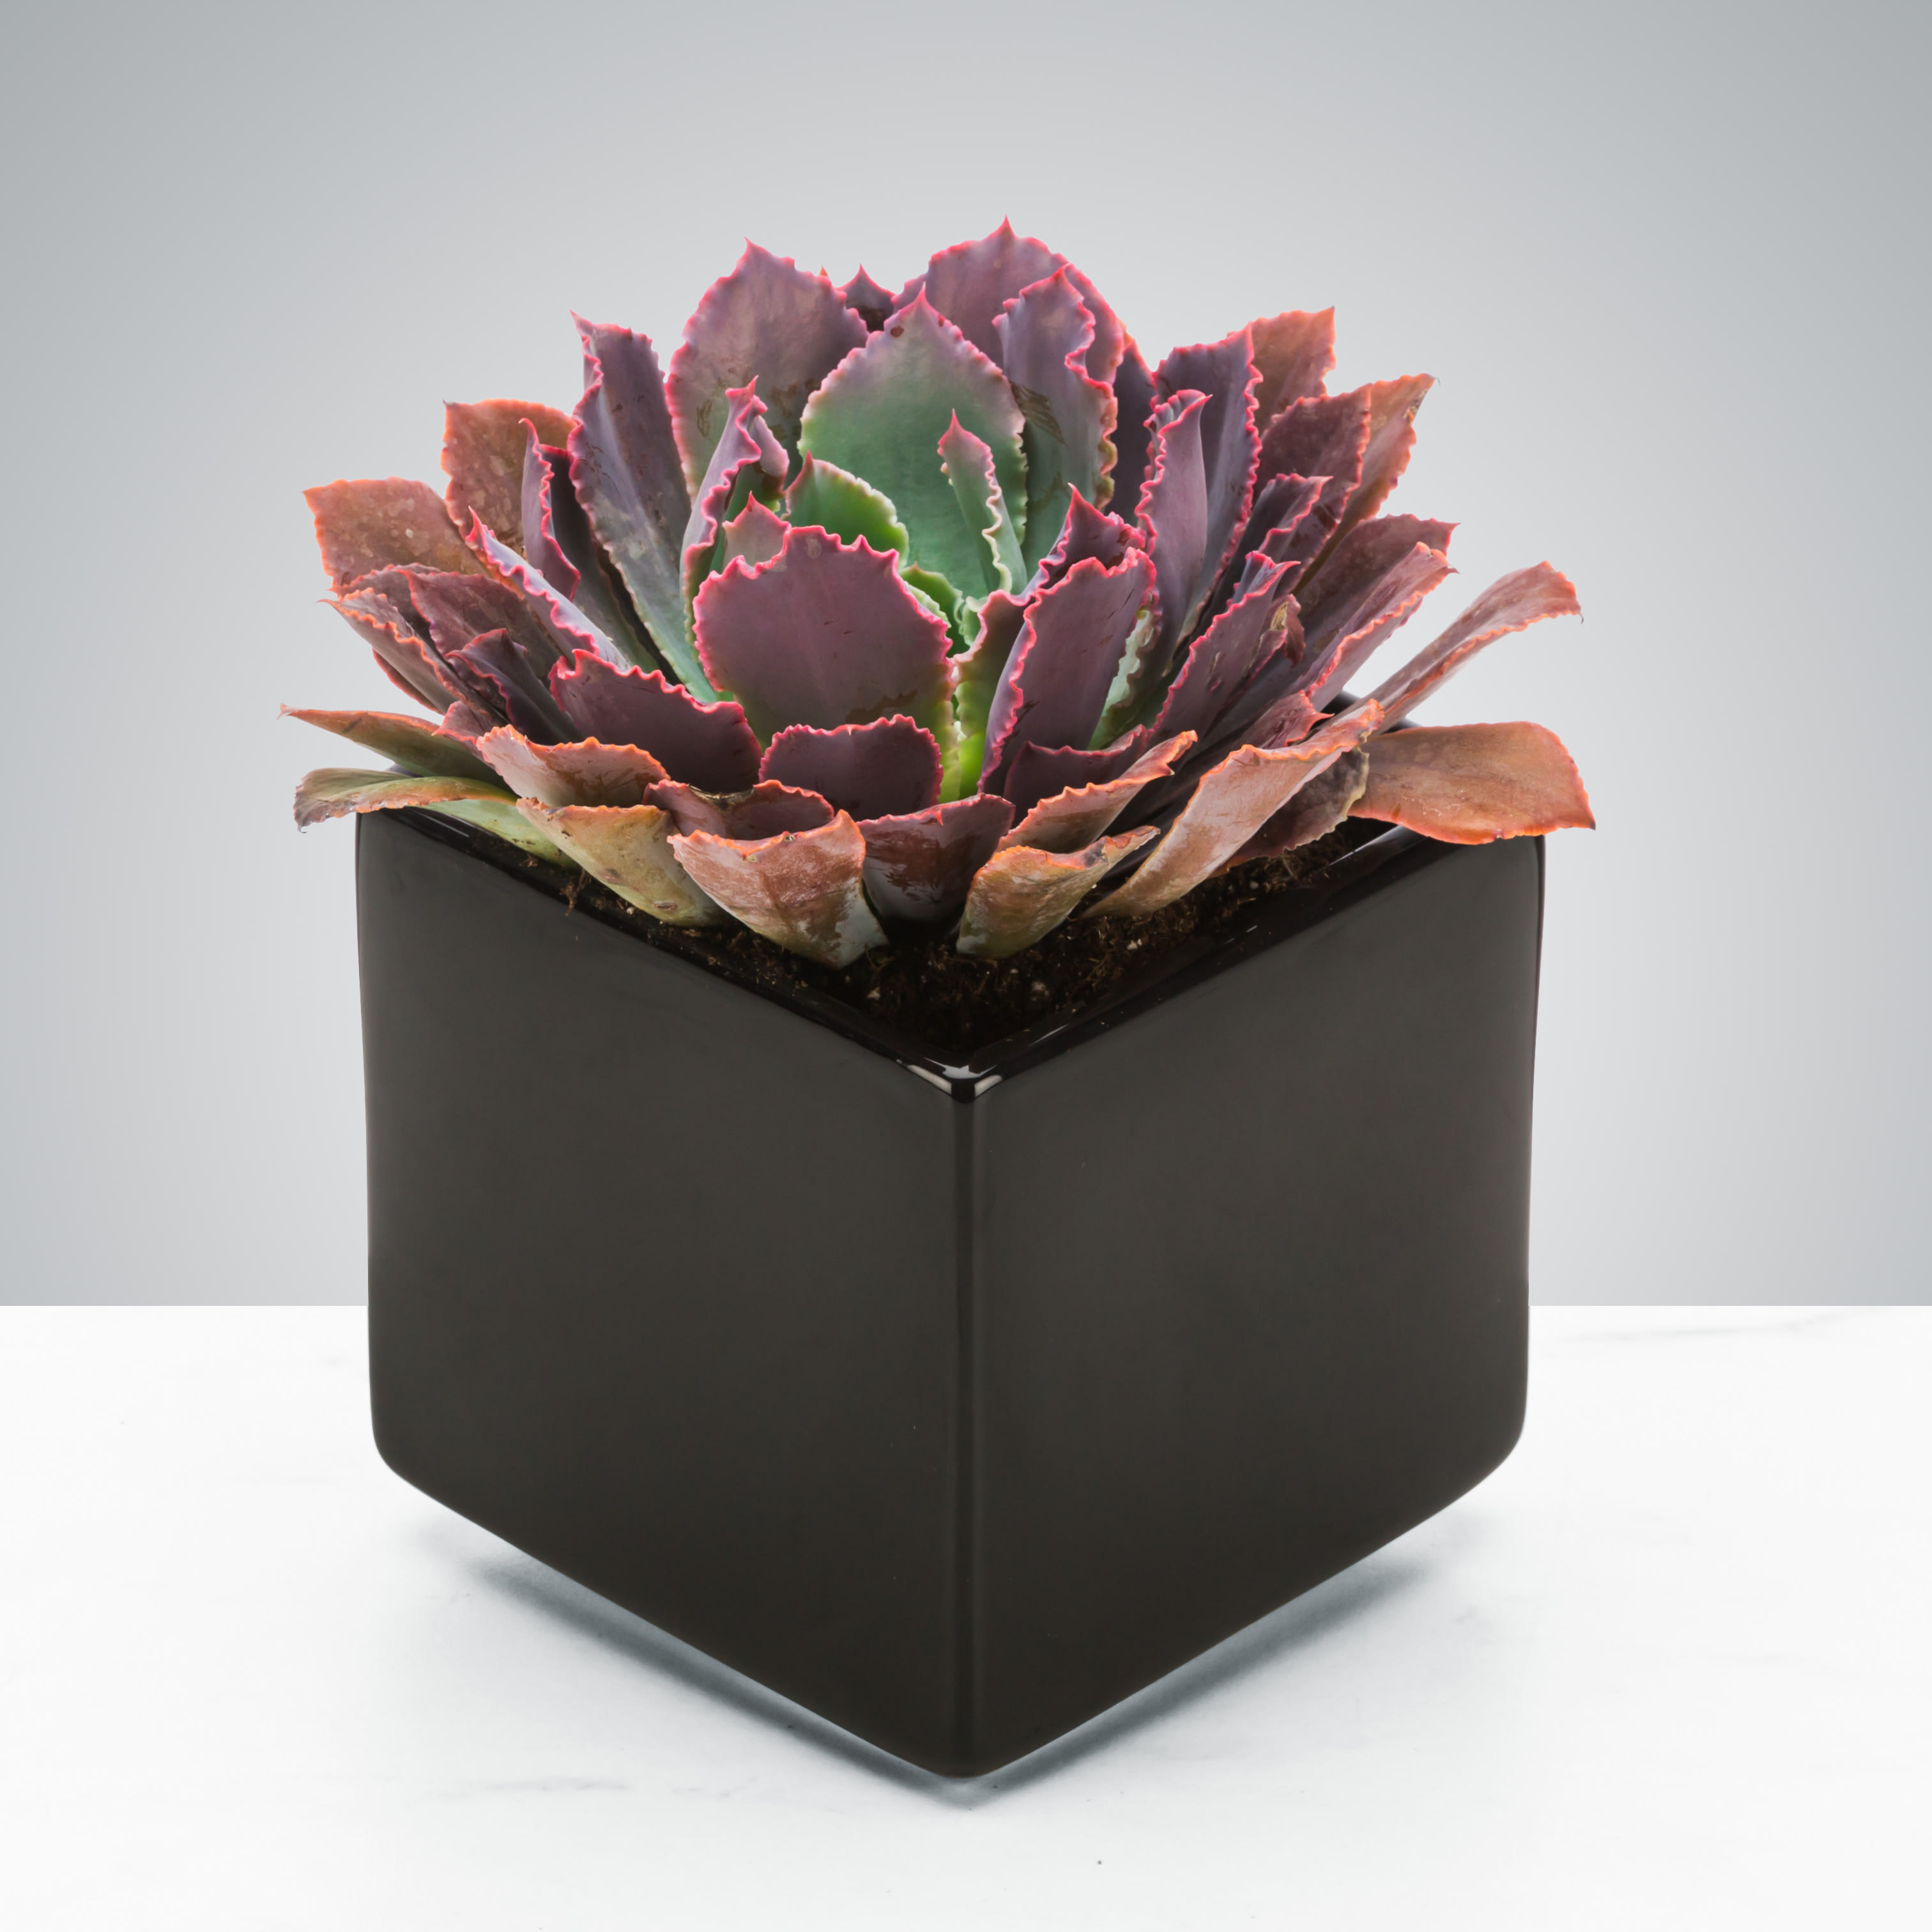 Dark Succulent by BloomNation™ - Send a dark potted succulent for Father's Day, to celebrate a career win, or just because. It can be enjoyed for years if you treat it right! Vase and succulent variety can change based on availability.